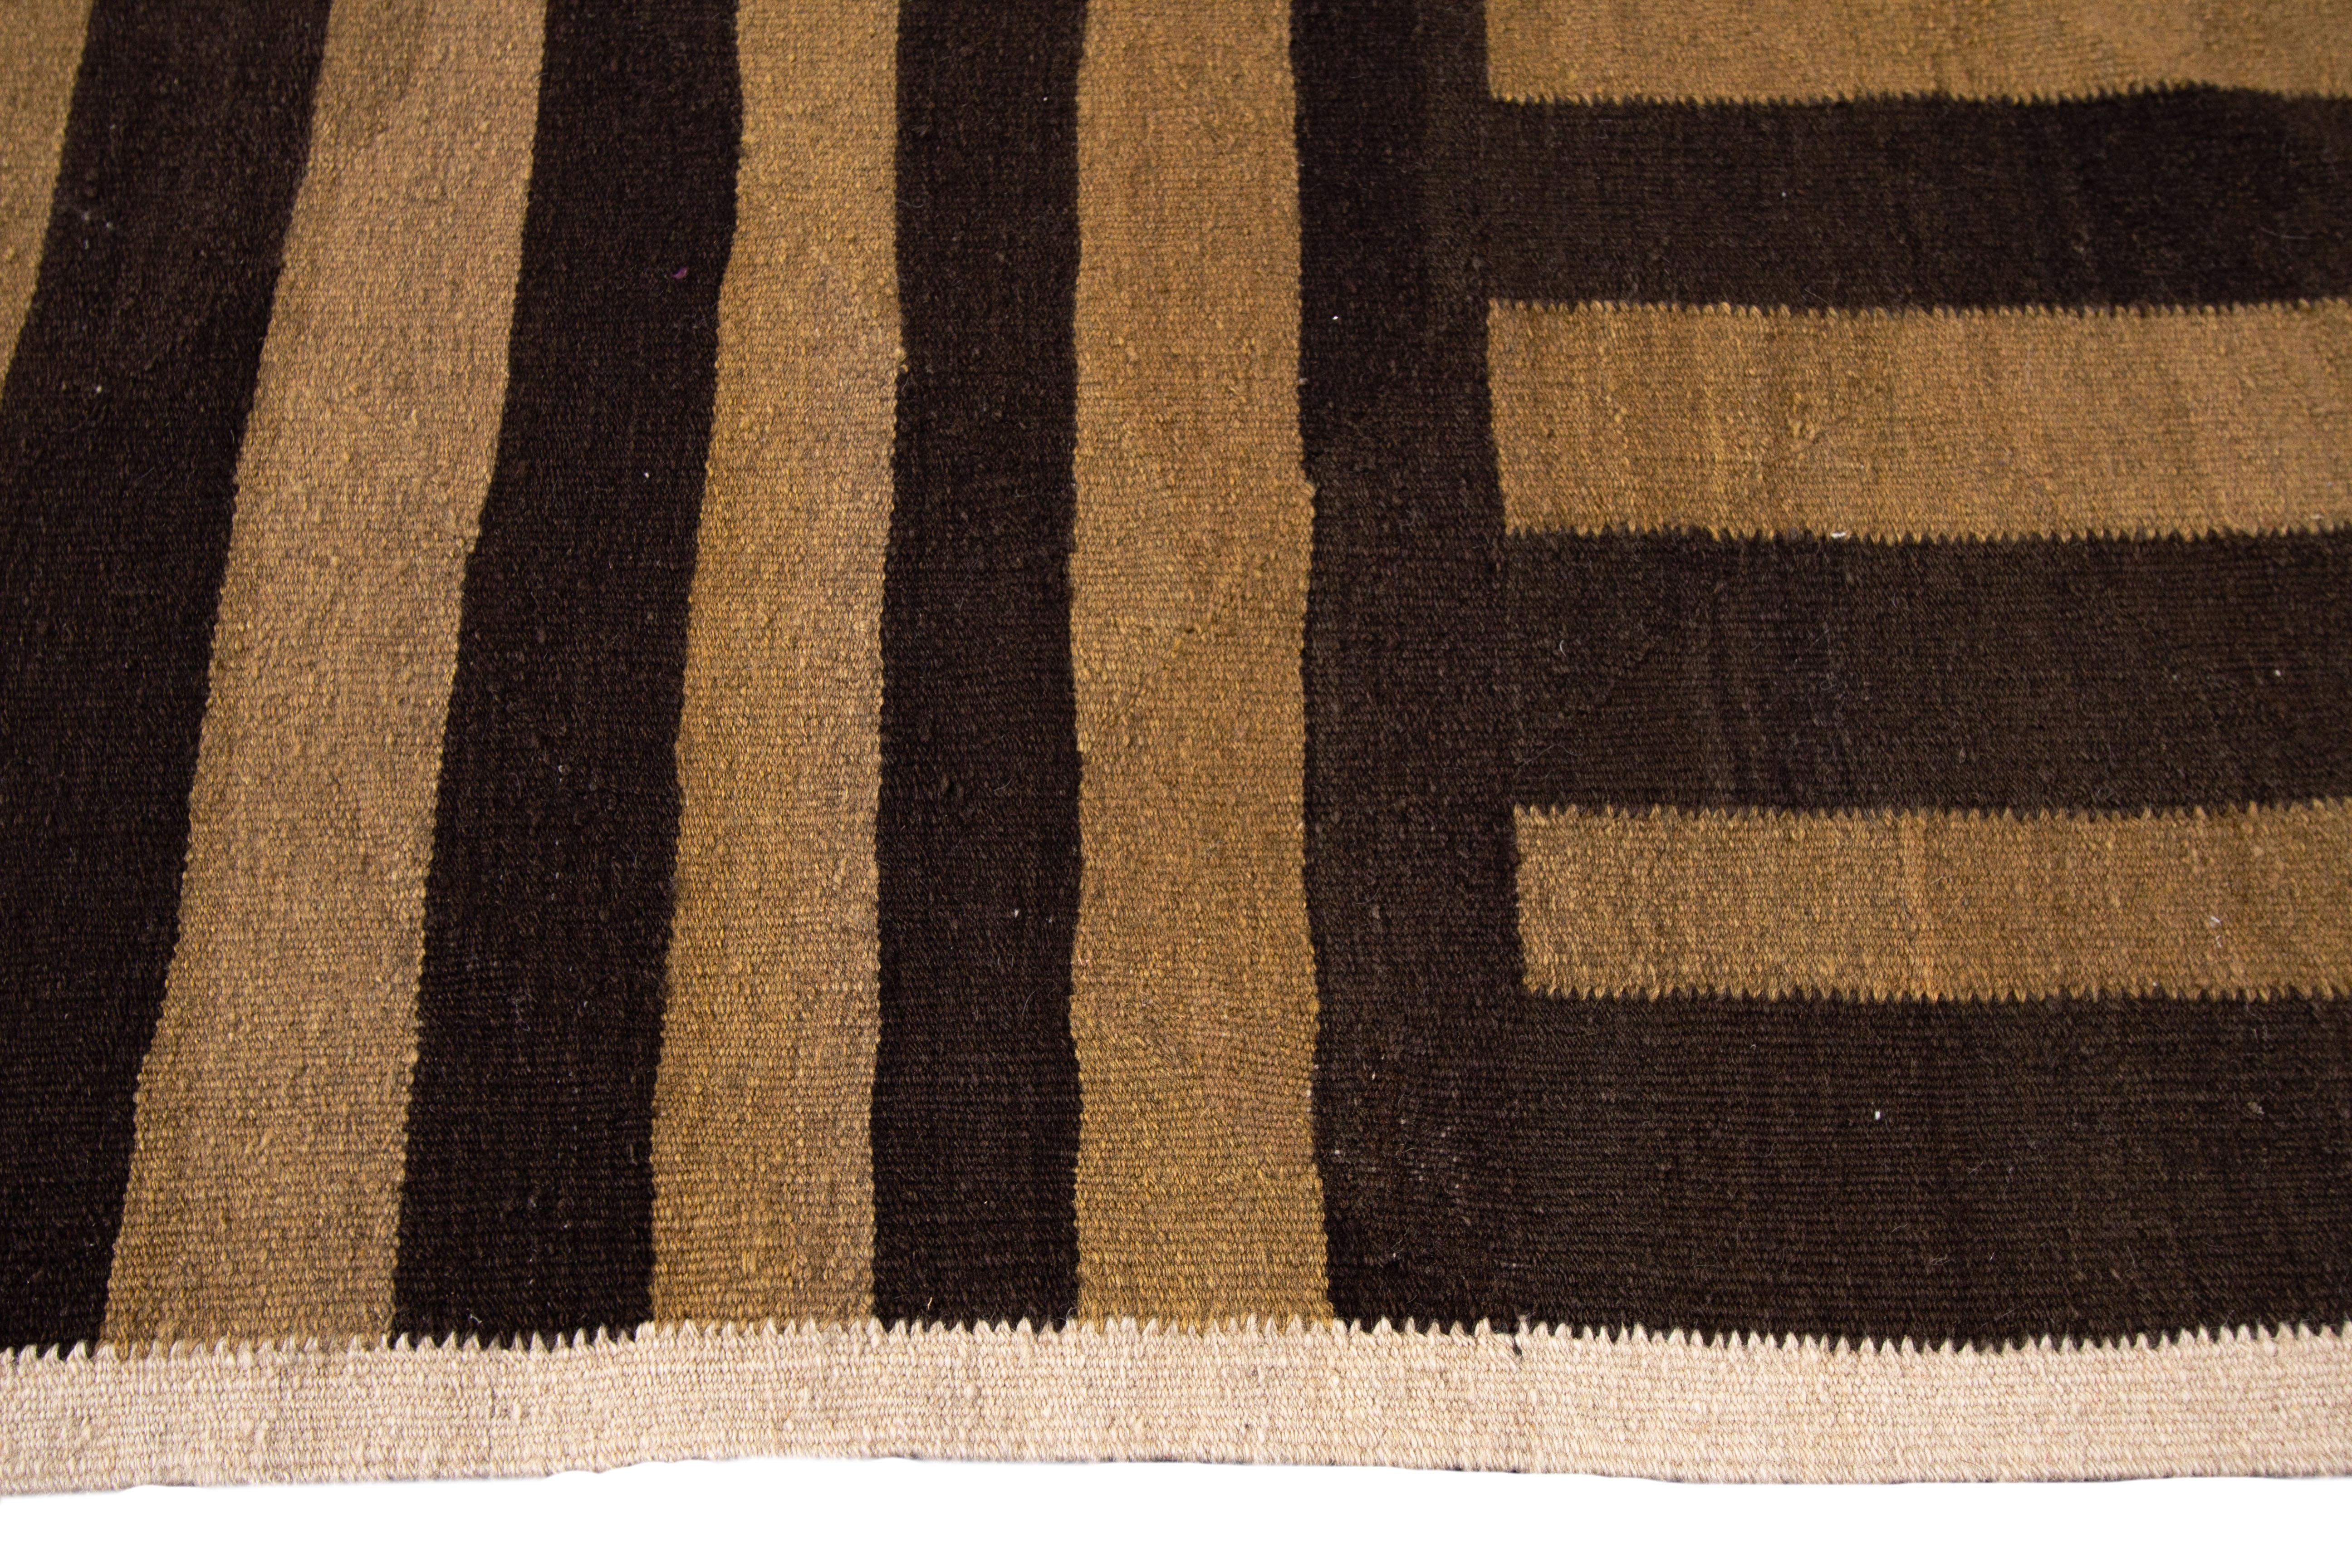 Hand-knotted rug with a lined design on a brown field with beige borders. Measures: 8'7